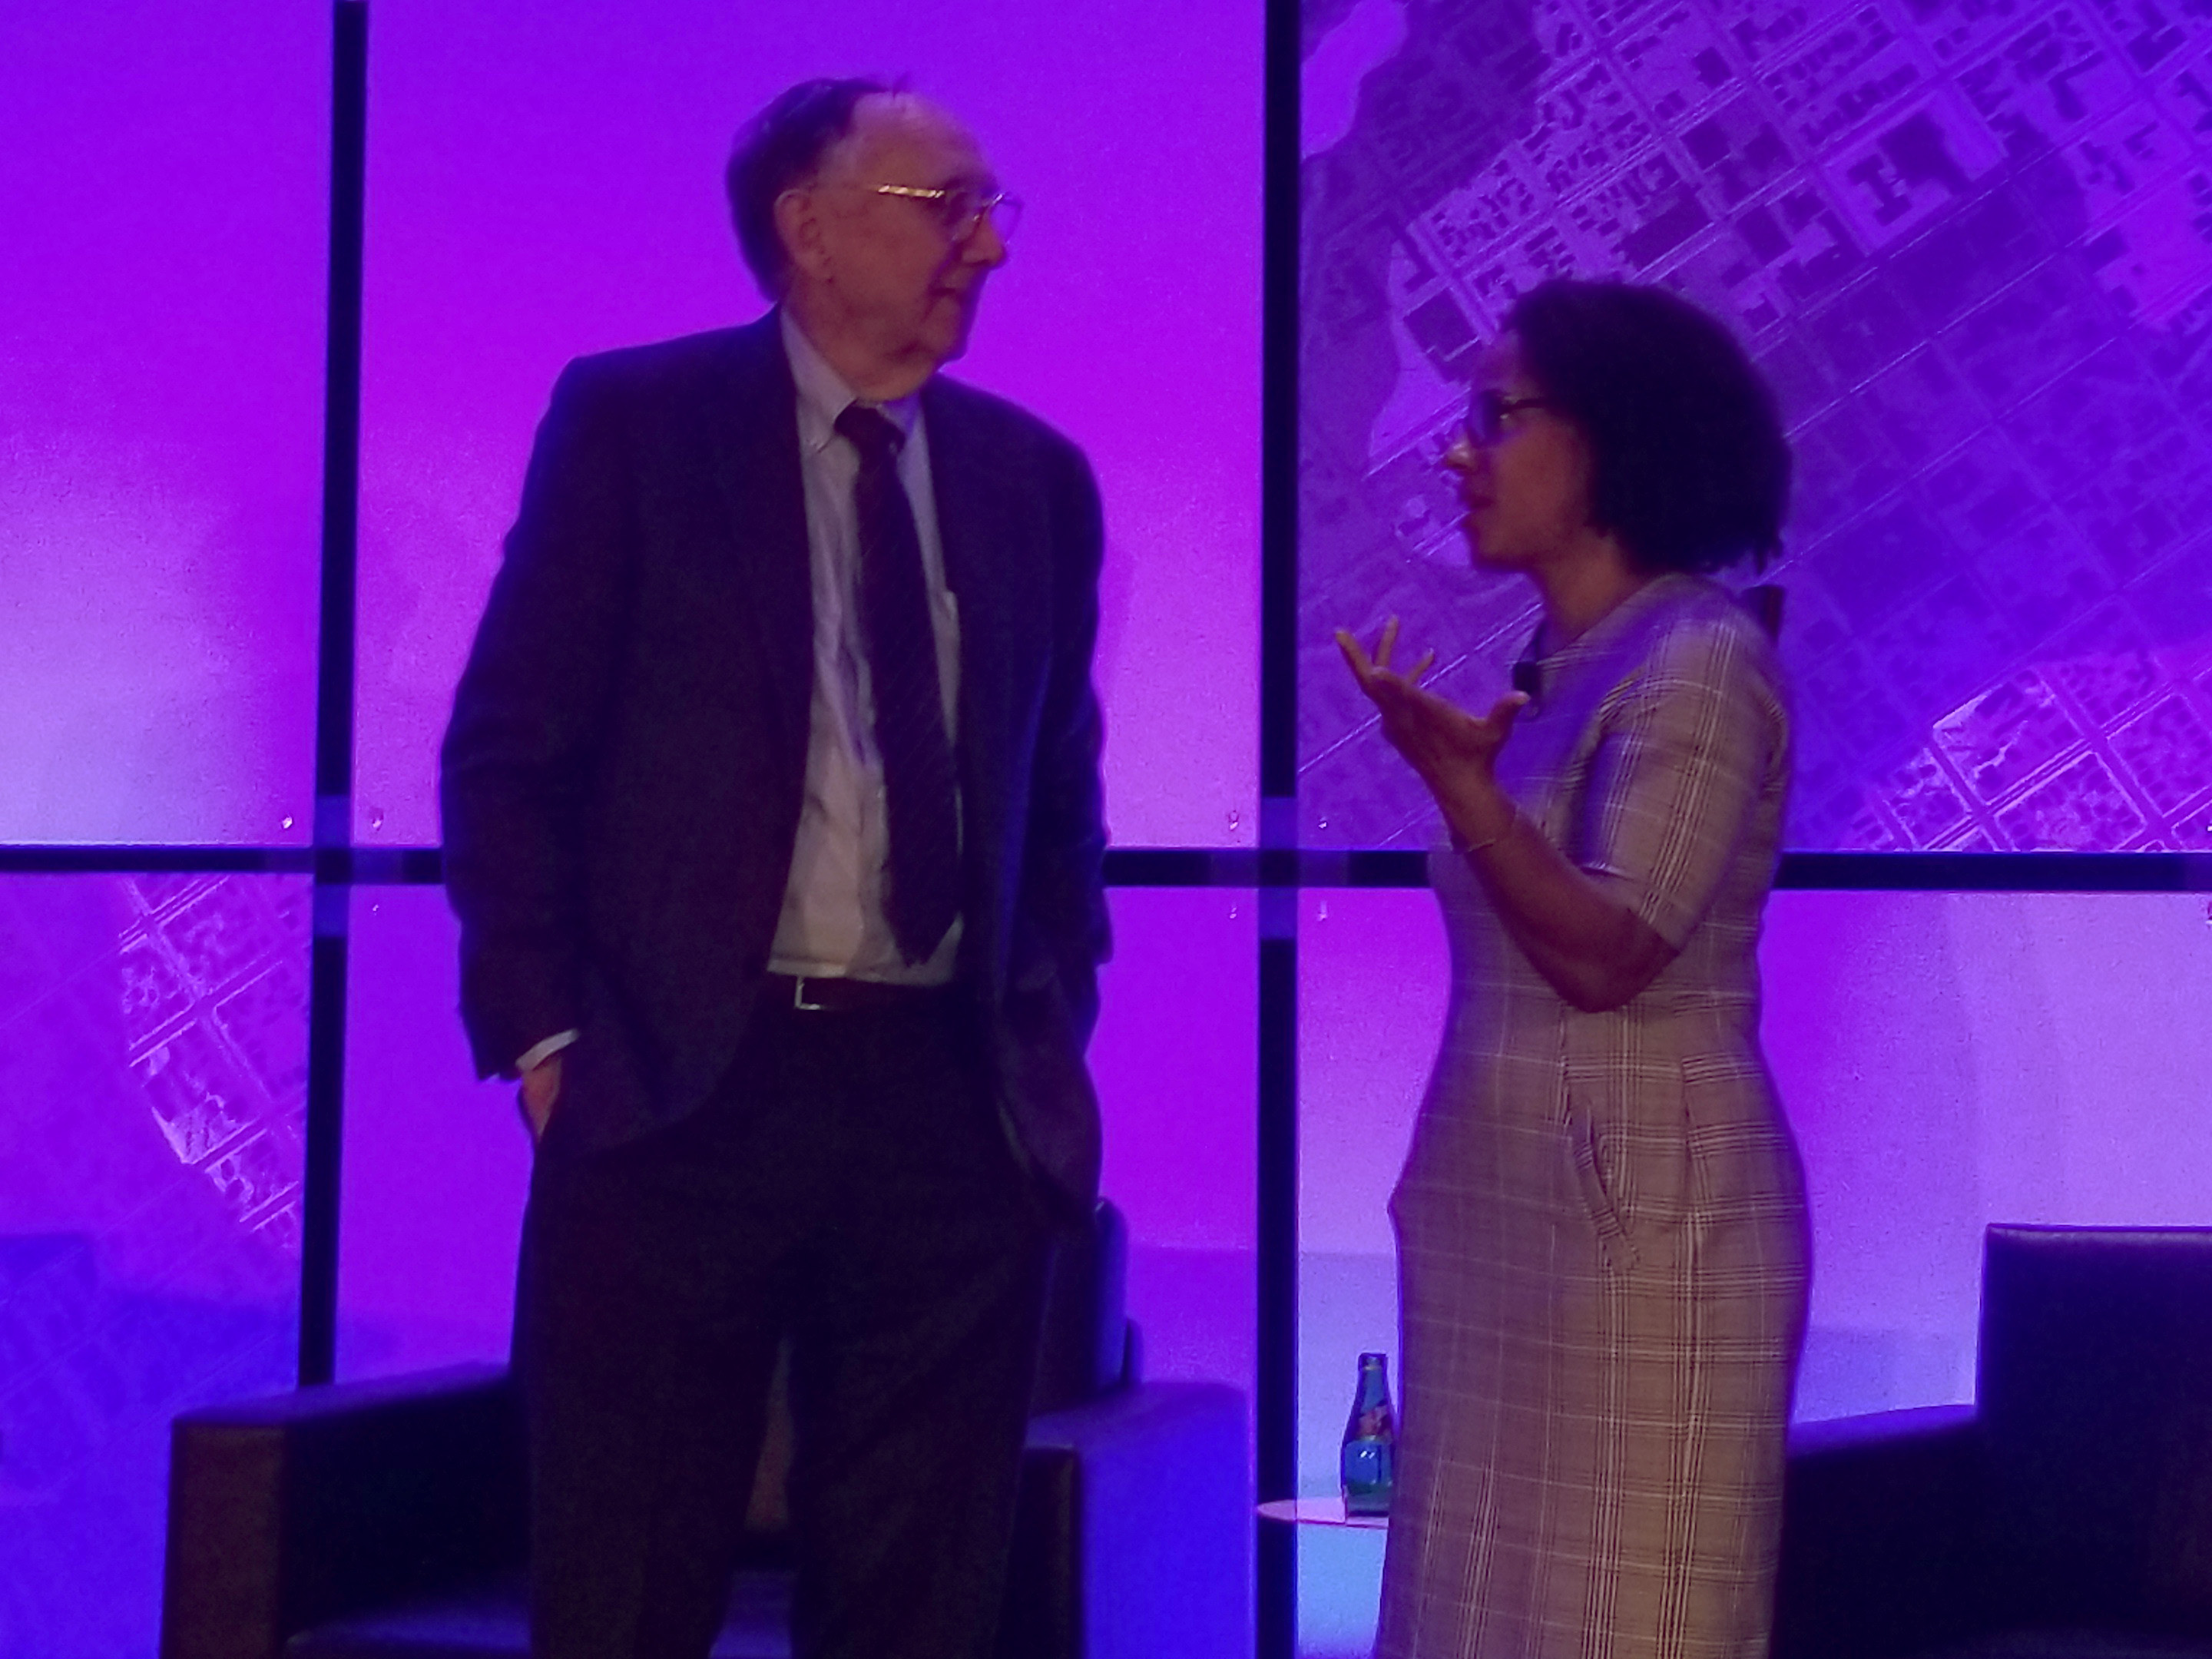 Jack Dangermond and Eva Reid chatted after the YPN Luncheon Q&A Session.